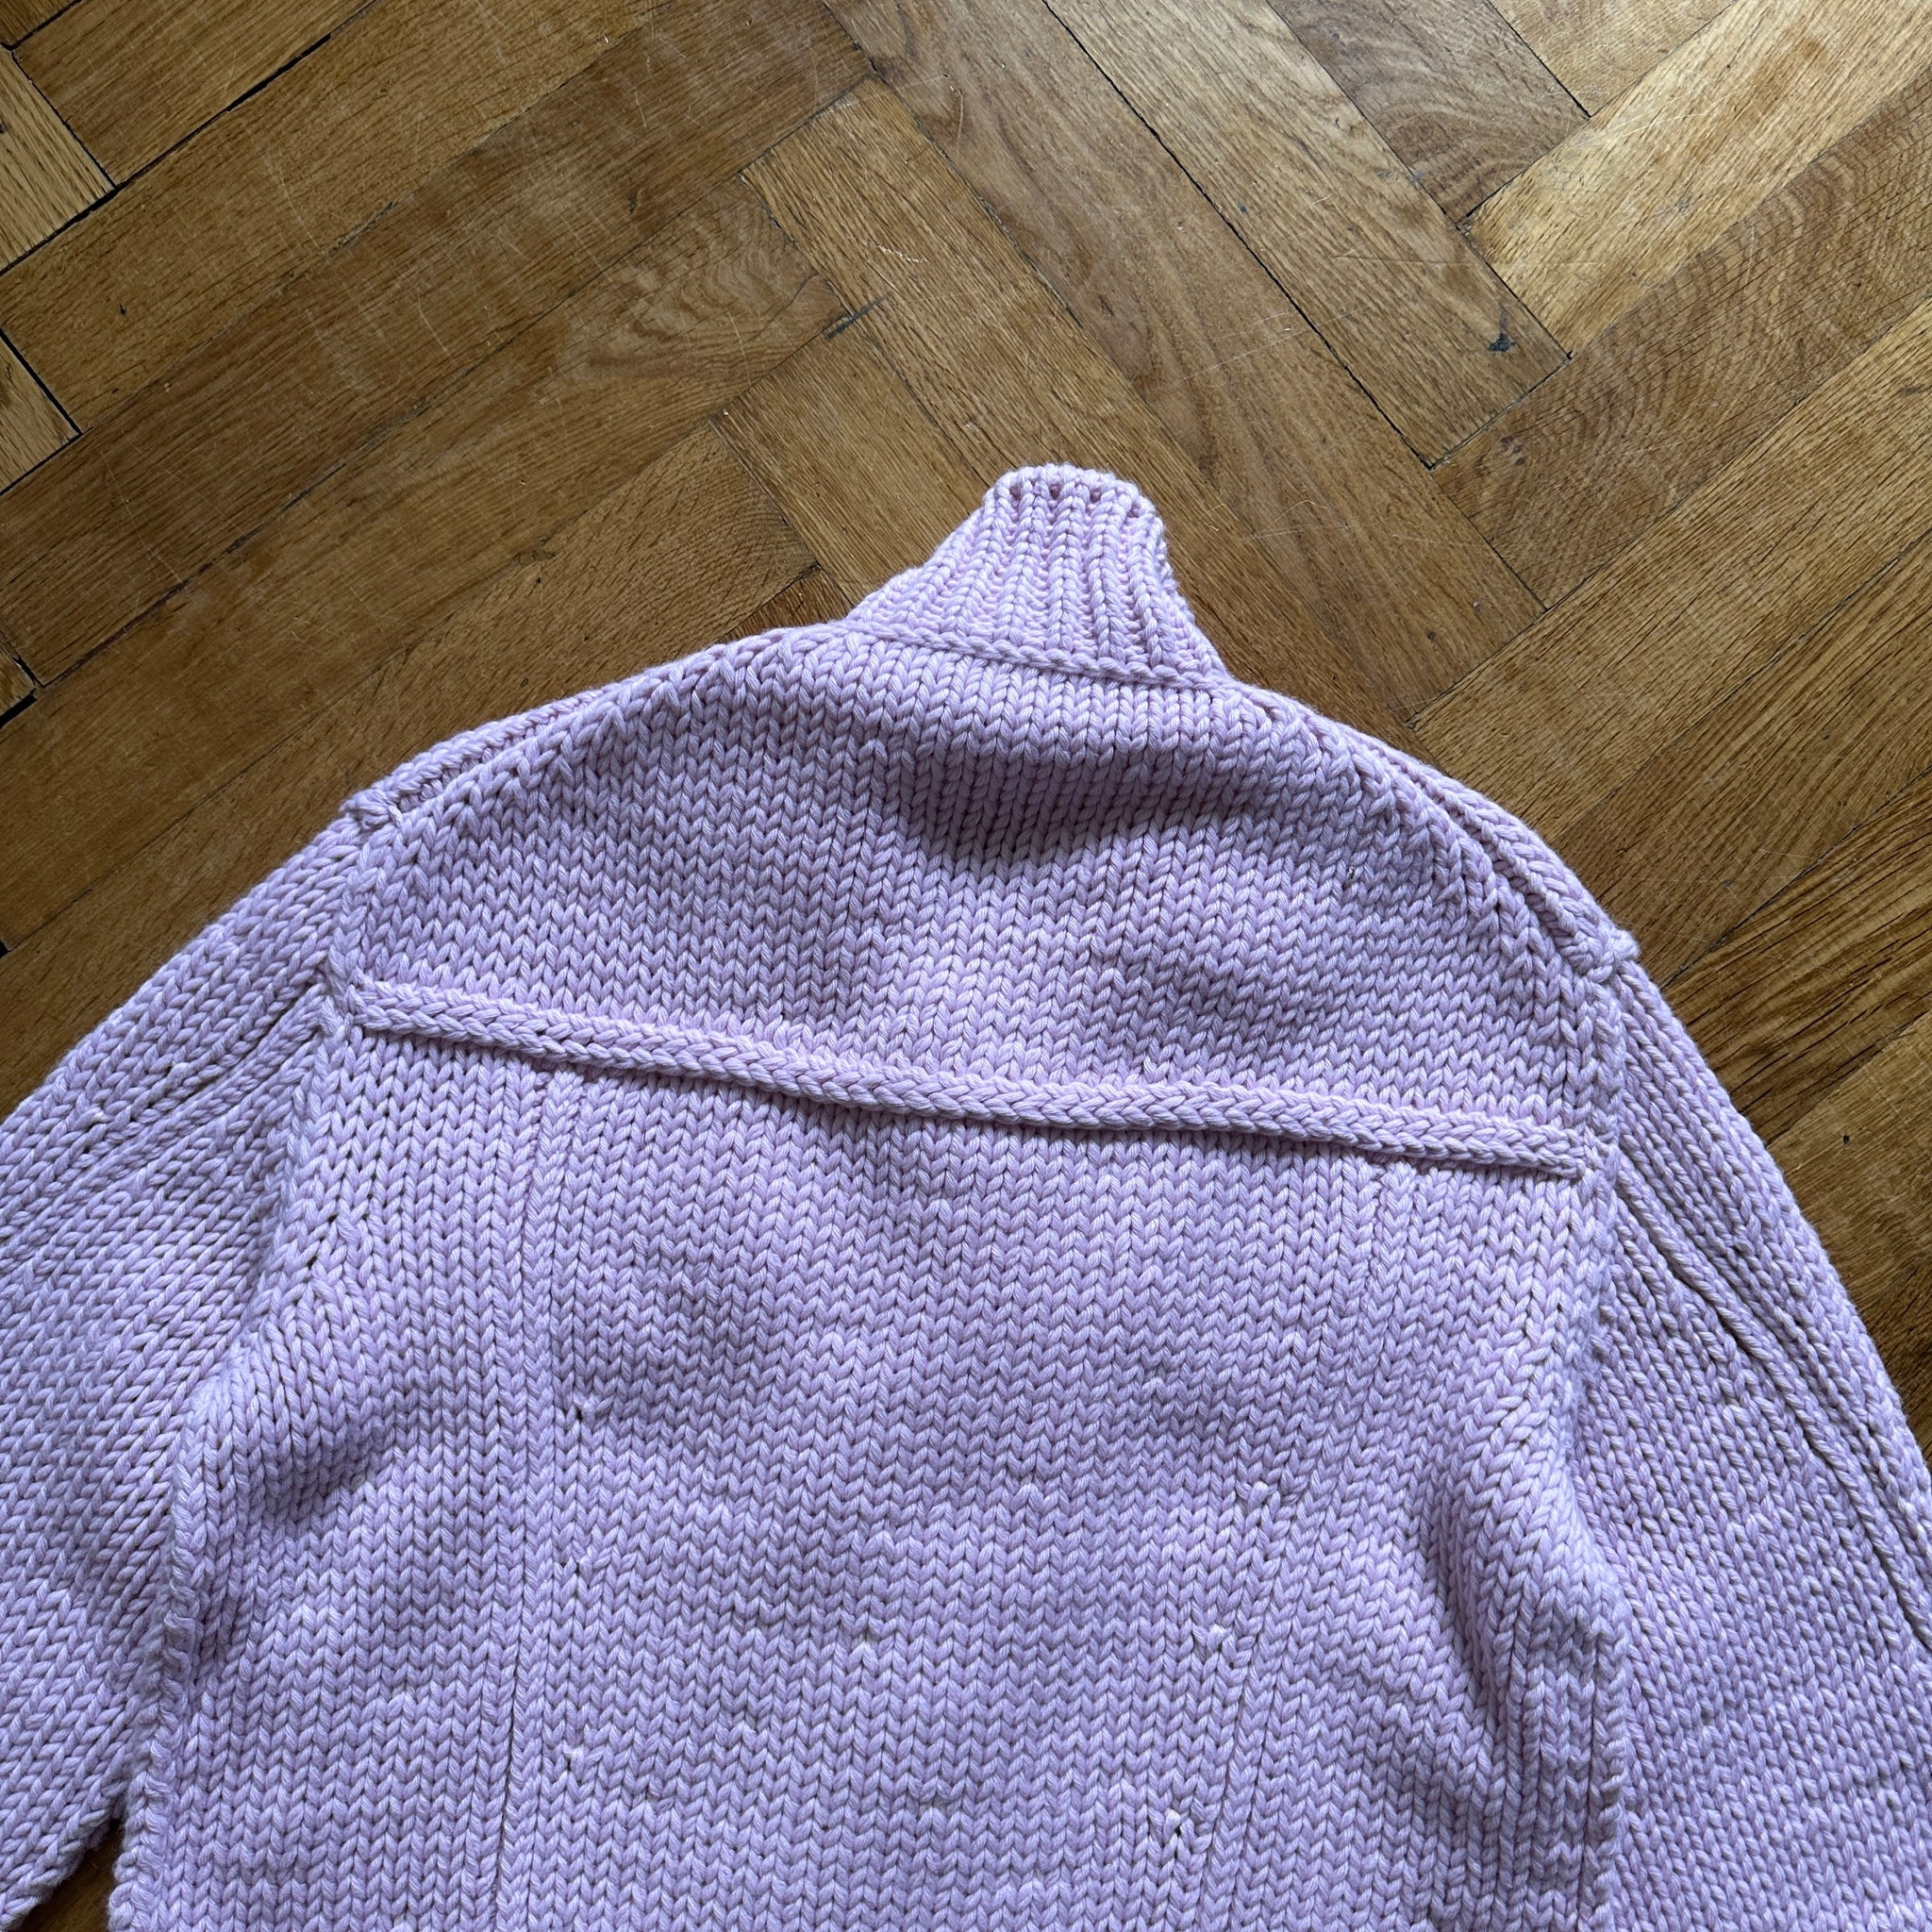 Louis Vuitton chunky buttoned knit jacket SS20 via @rys